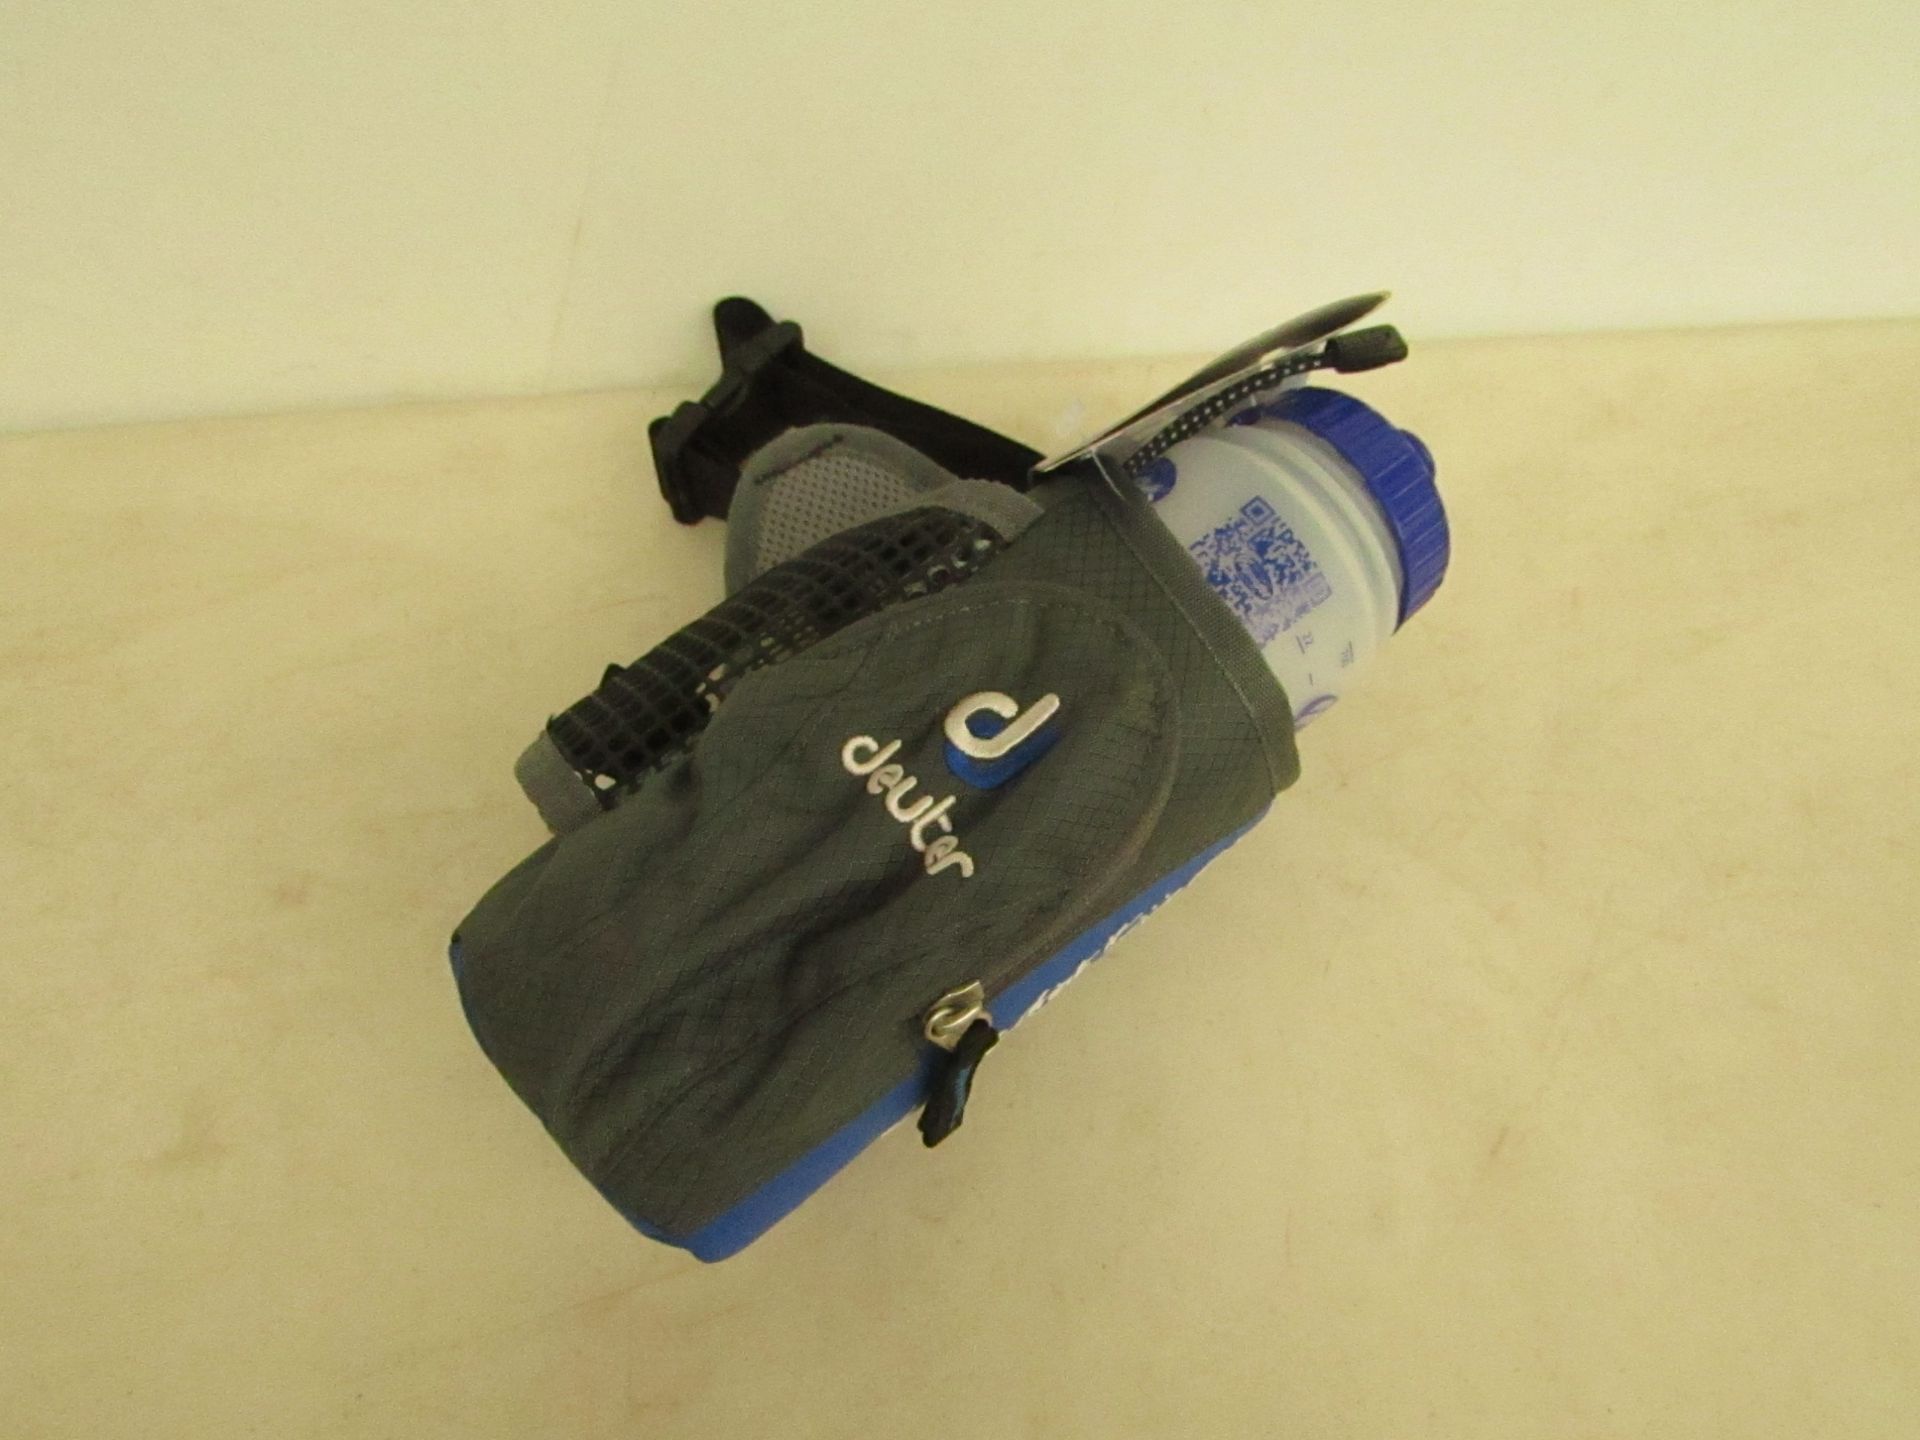 Deuter Xenofit comes with strap carry bag (2 zip up pouches and bottle holder)and 700ml water